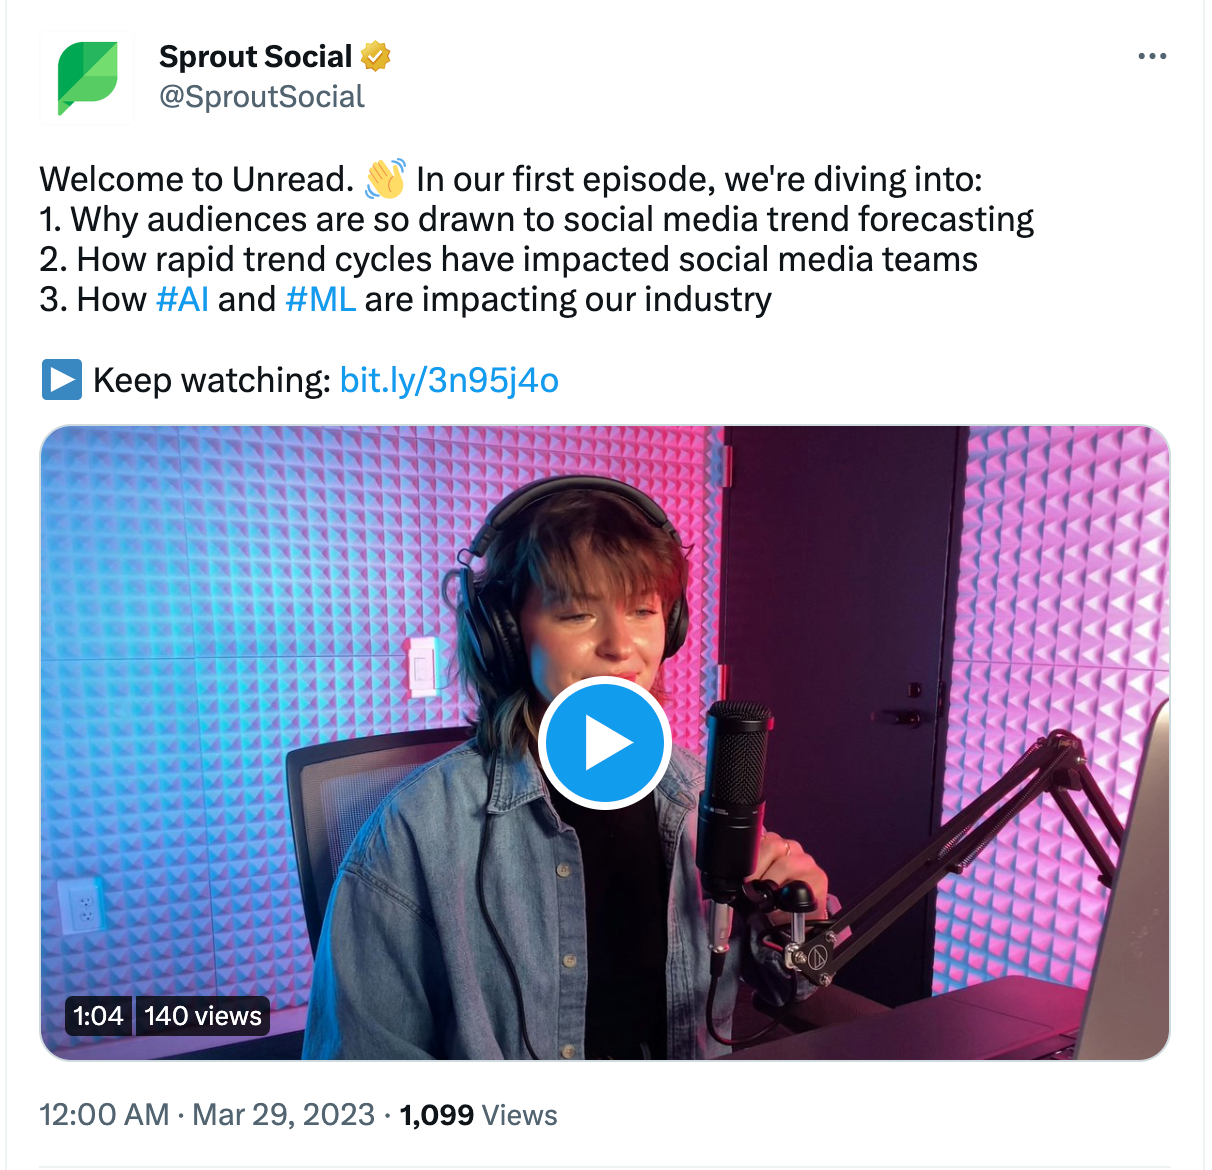 Screenshot of a Sprout Social tweet that describes what users will learn when watching the embedded video.